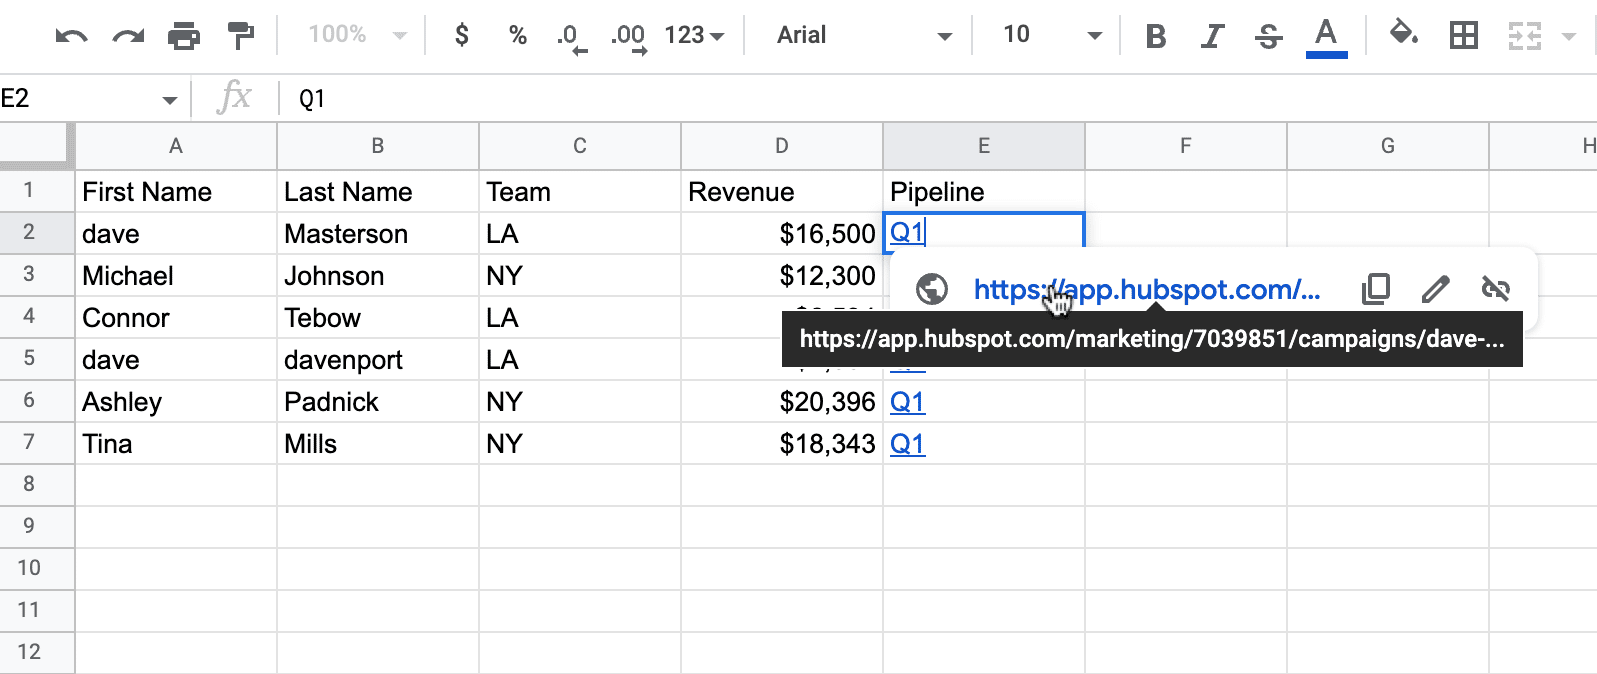 search for URL google spreadsheet